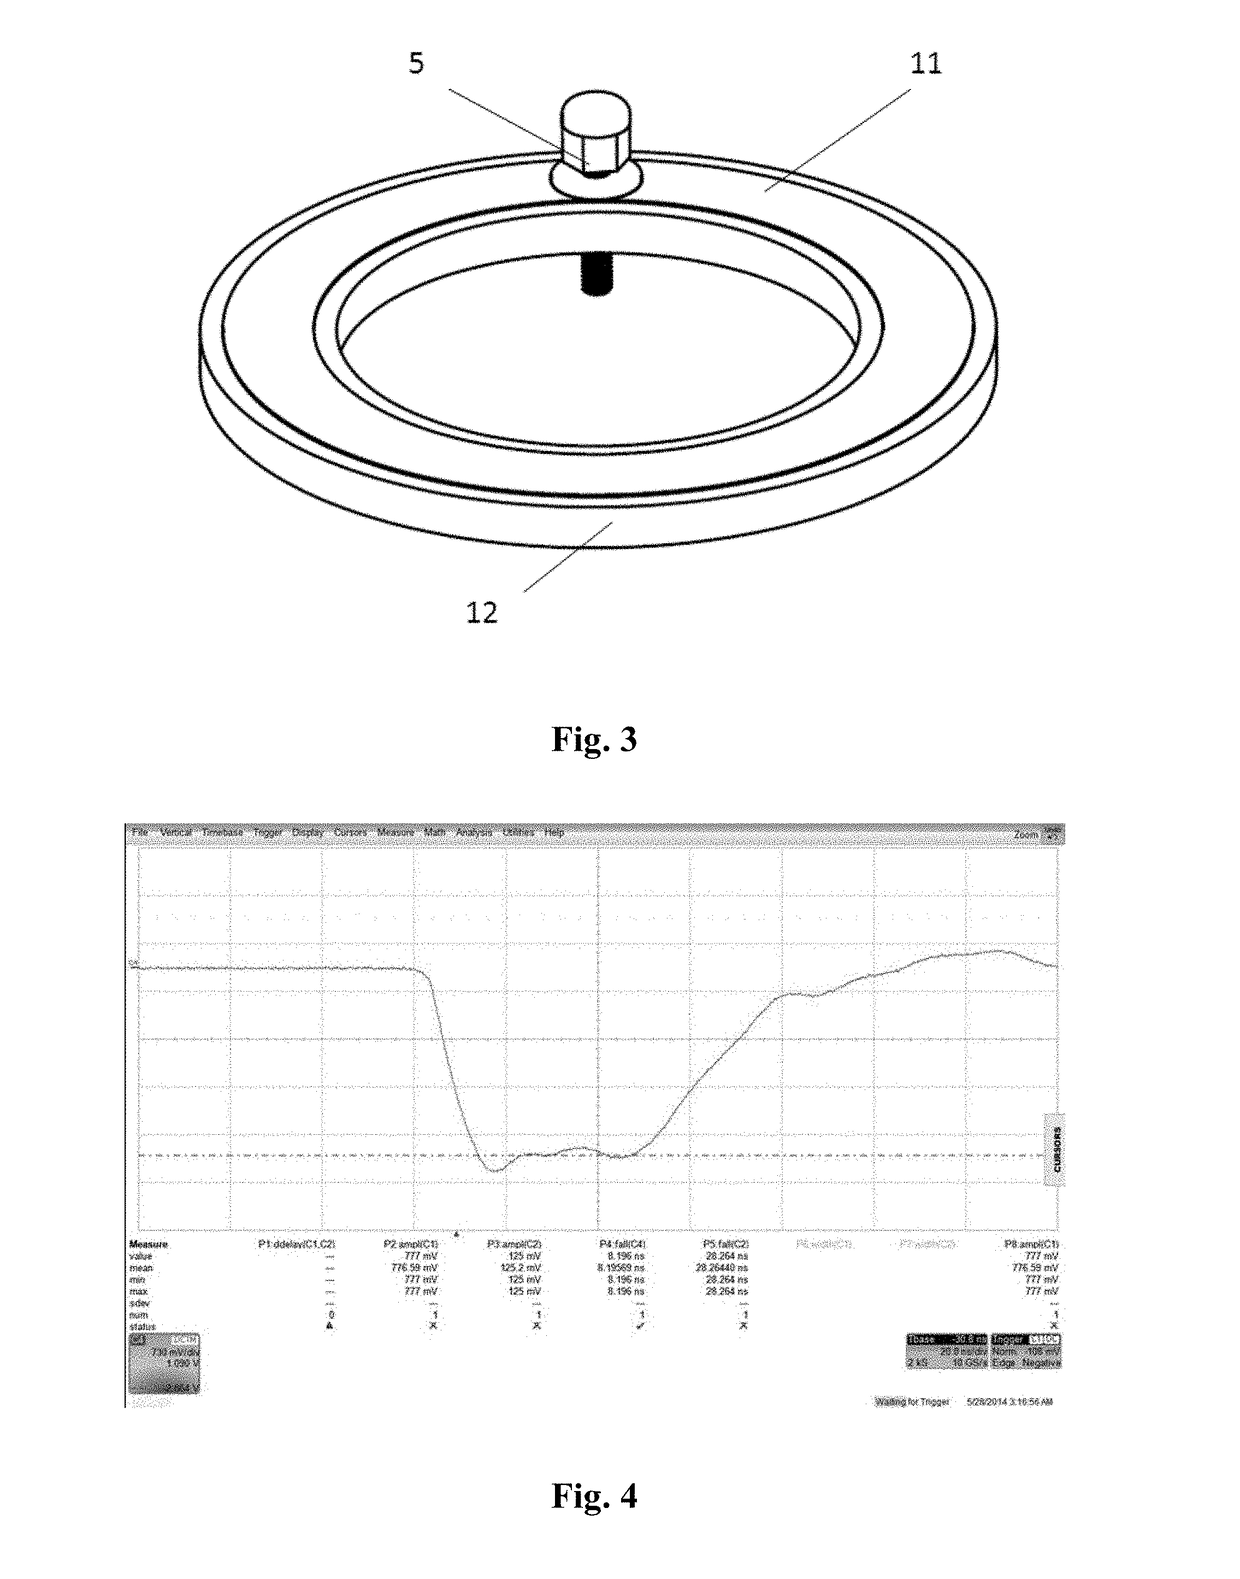 Pulse power device based on annular ceramic solid state line